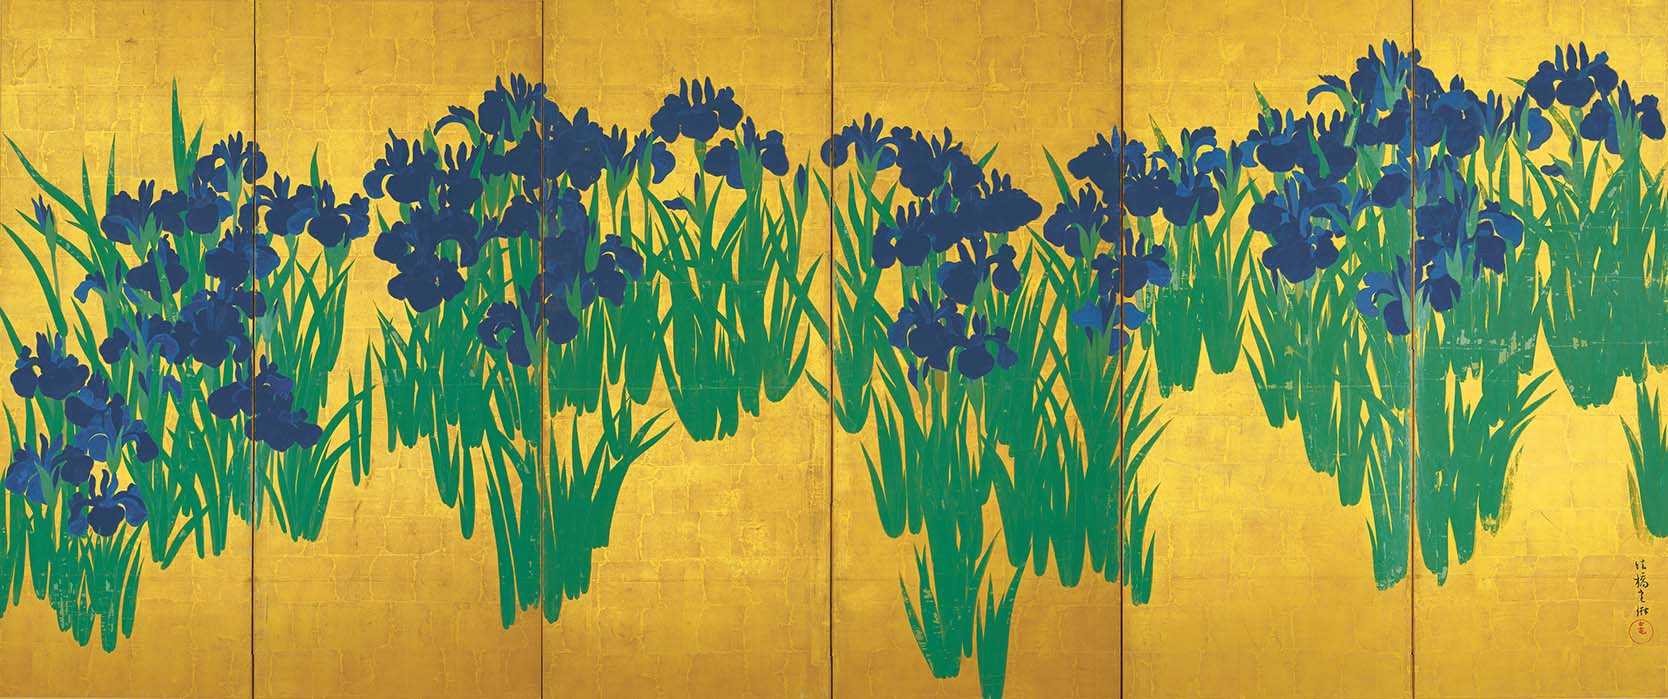 Here is Ogata Korin’s “Irises”. Only three colors were used on gold-foiled paper.